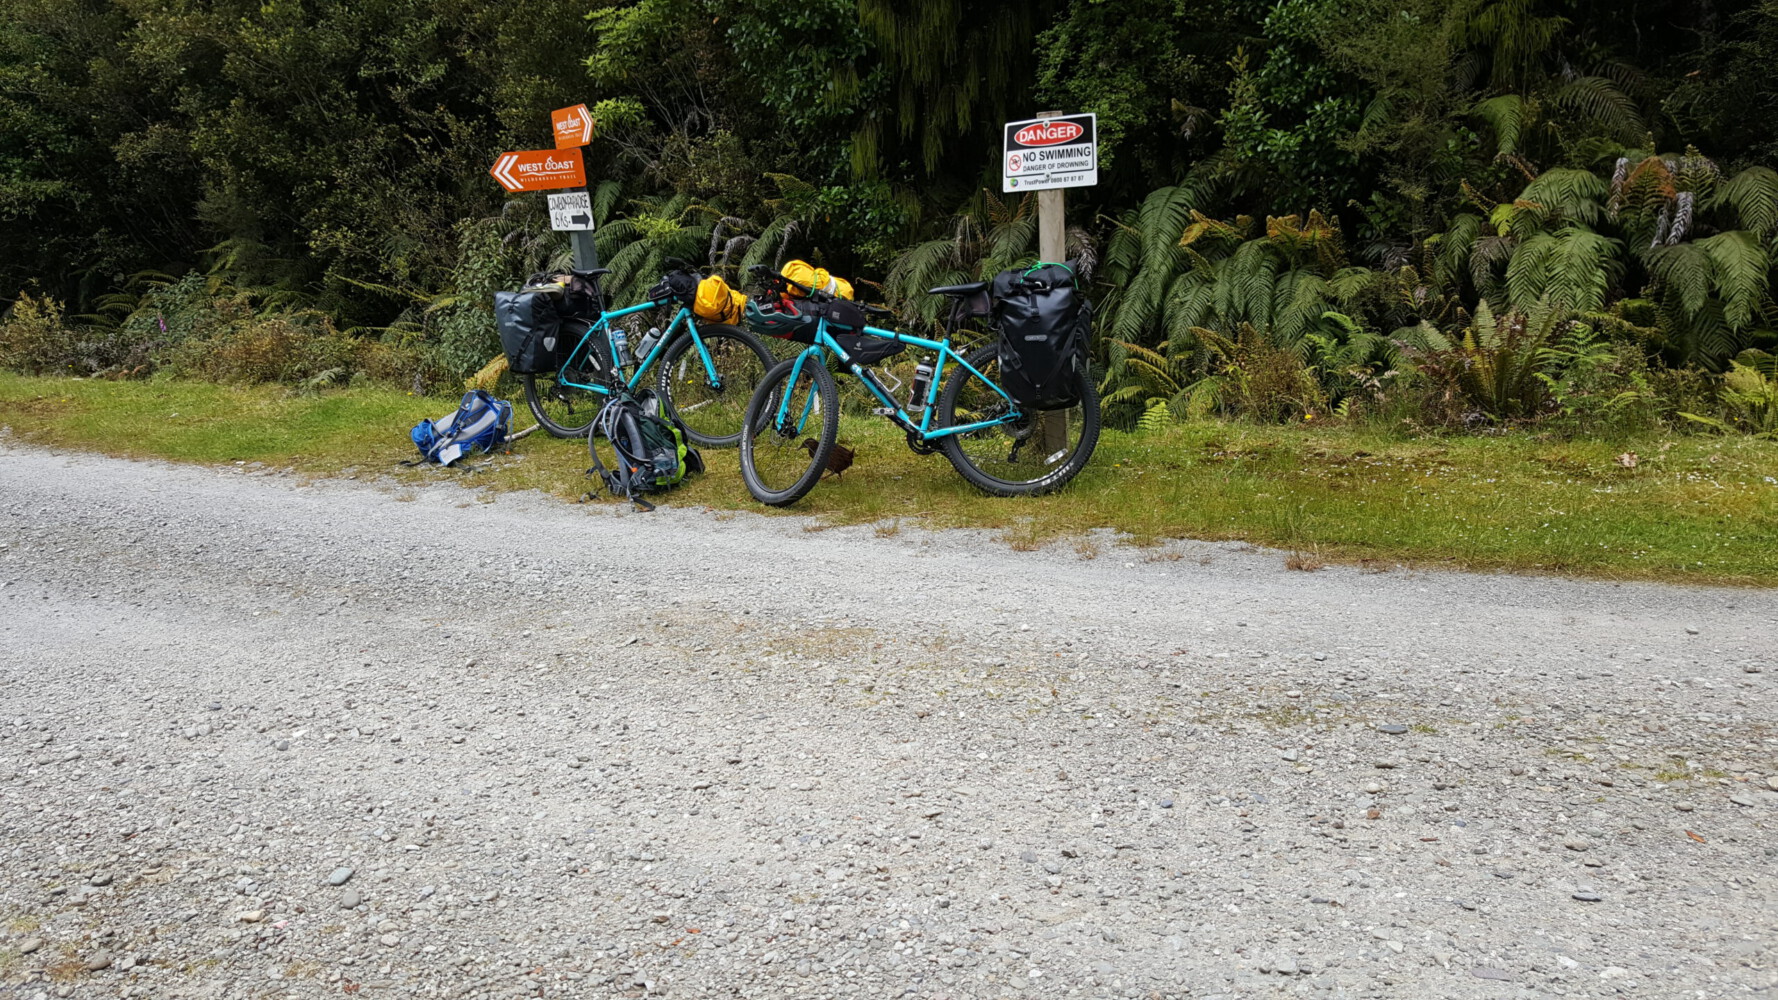 Weka inspecting our bikes